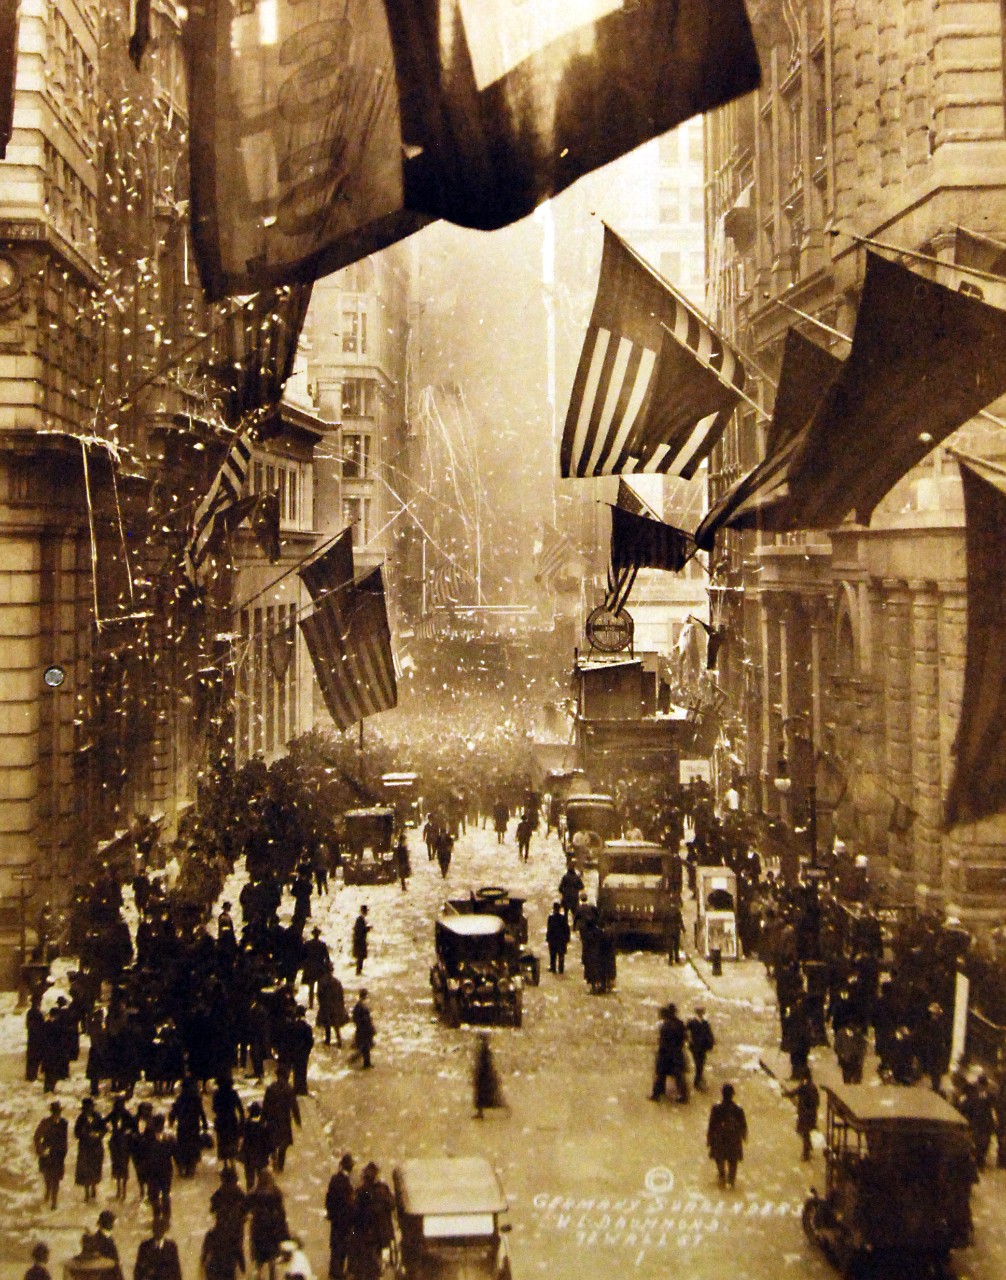 <p class="MsoNormal" style="margin-bottom: .0001pt; line-height: normal;"><span style="font-family: &quot;Courier New&quot;;">Lot-8882-17: Armistice WWI.&nbsp; Germany Surrenders.&nbsp; Scene on Wall Street at the U.S. Treasury, New York City, New York, December 5, 1918.&nbsp; Harris &amp; Ewing Collection.&nbsp; Courtesy of the Library of Congress.&nbsp; (2016/11/18).</span></p>
